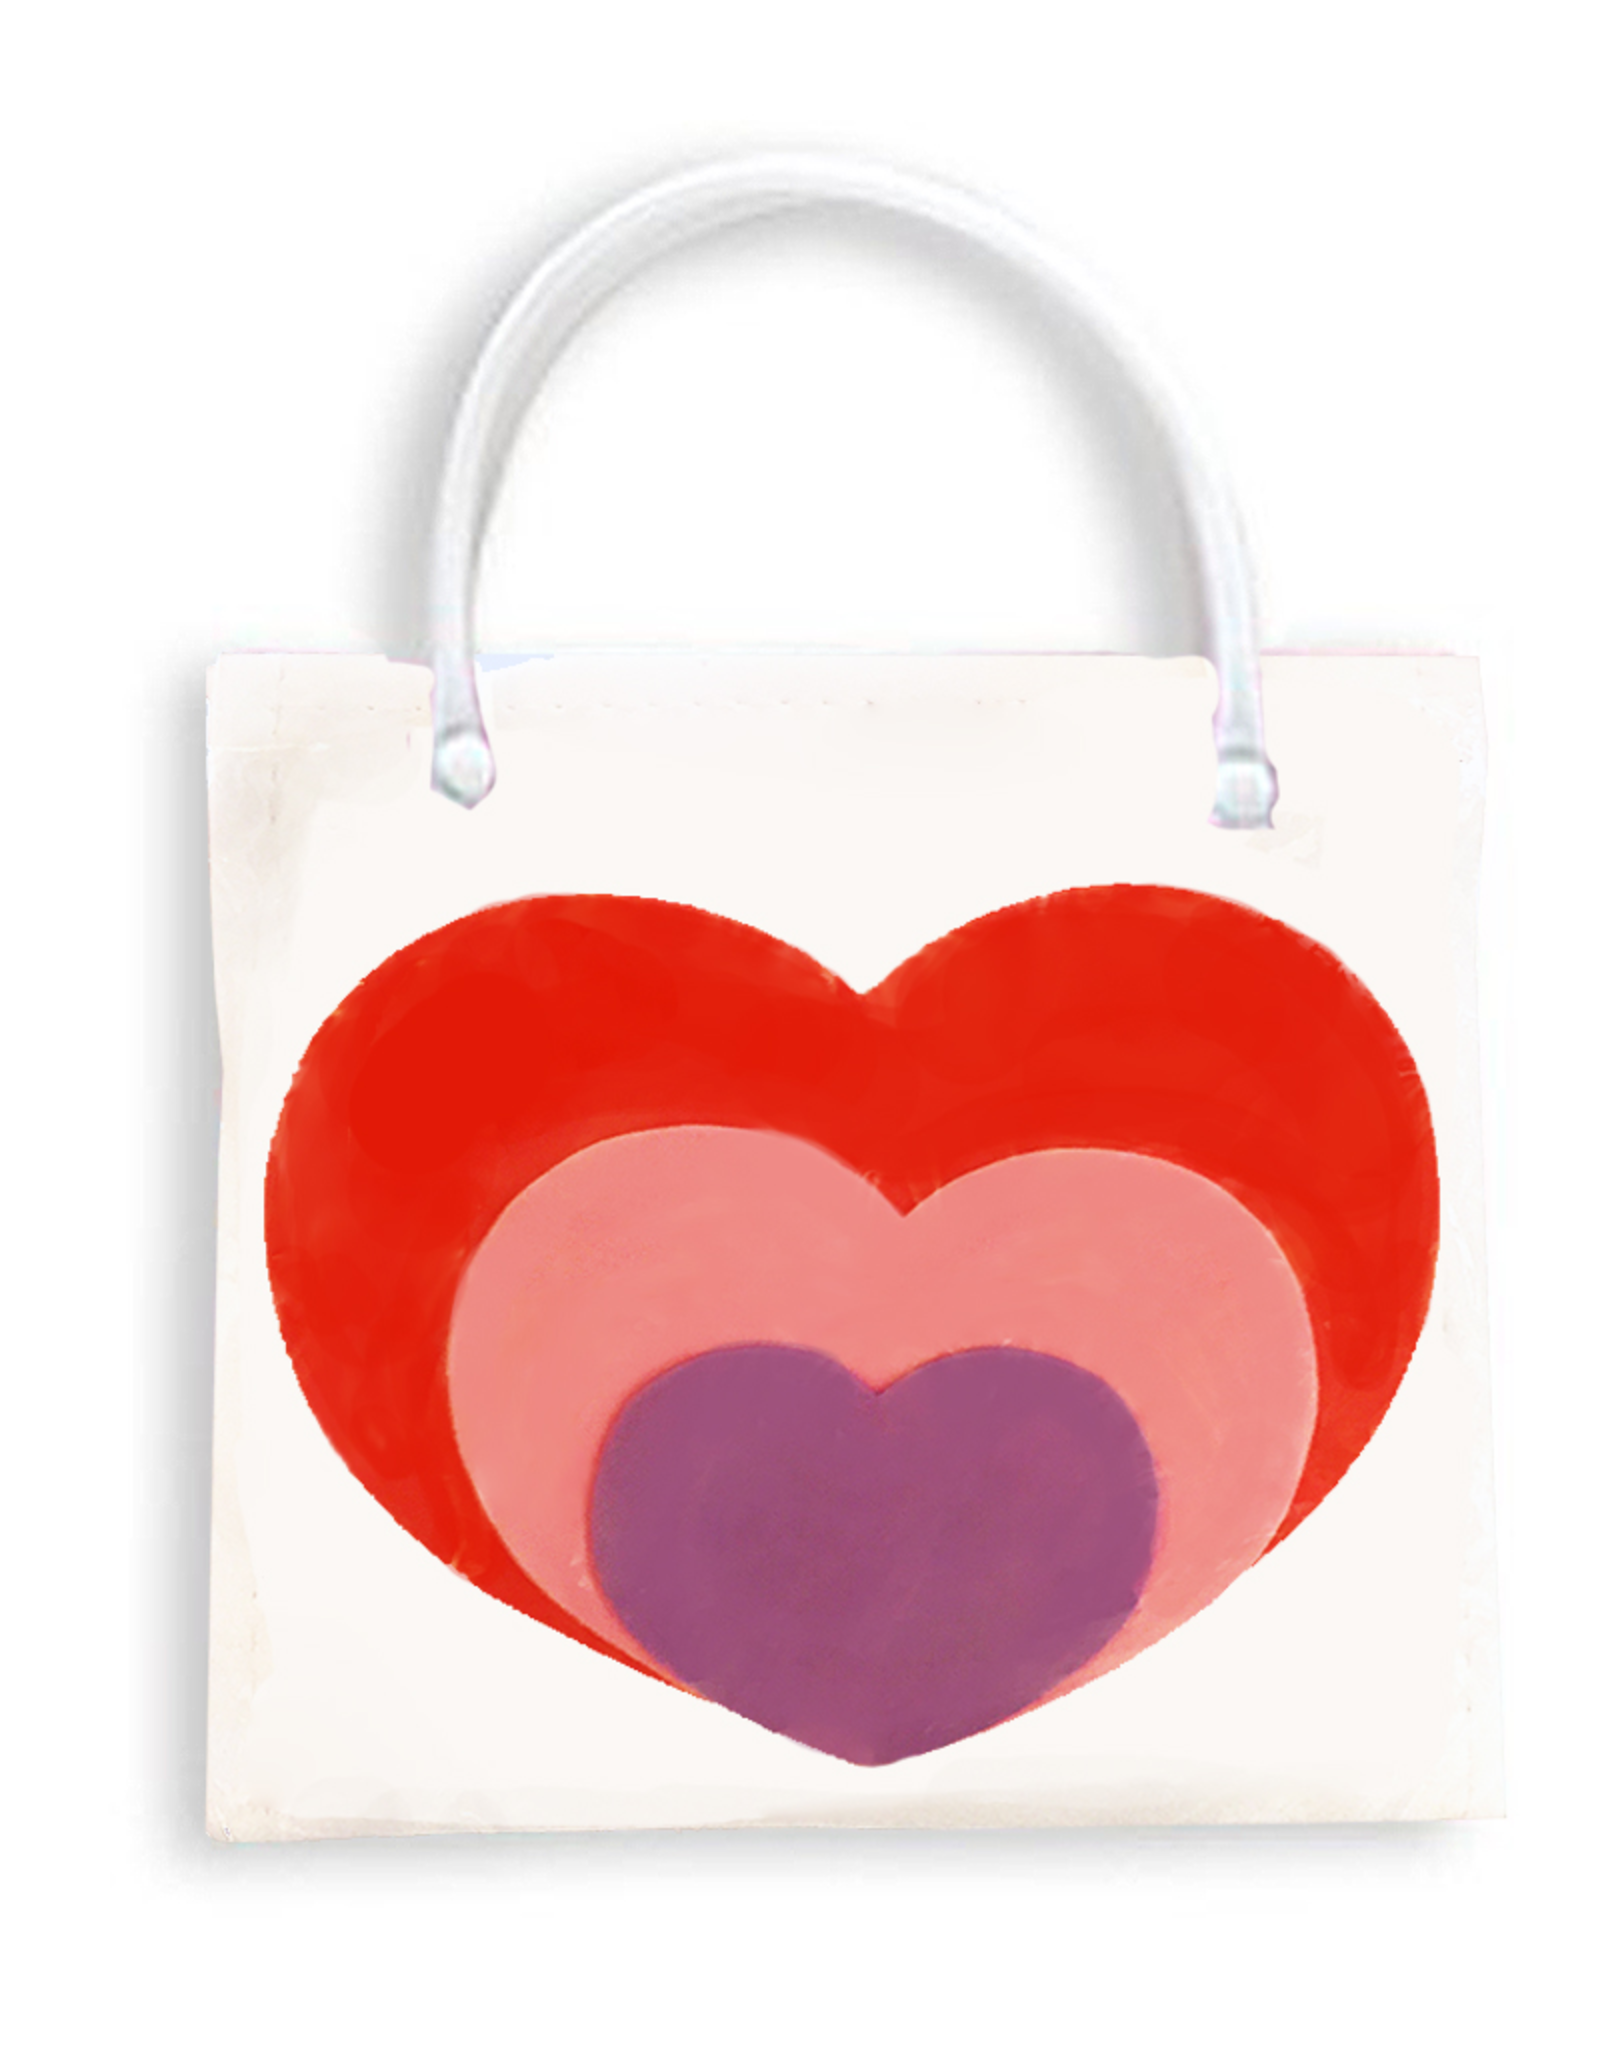 DMM Gifts Valentine's Gift Bag Tote